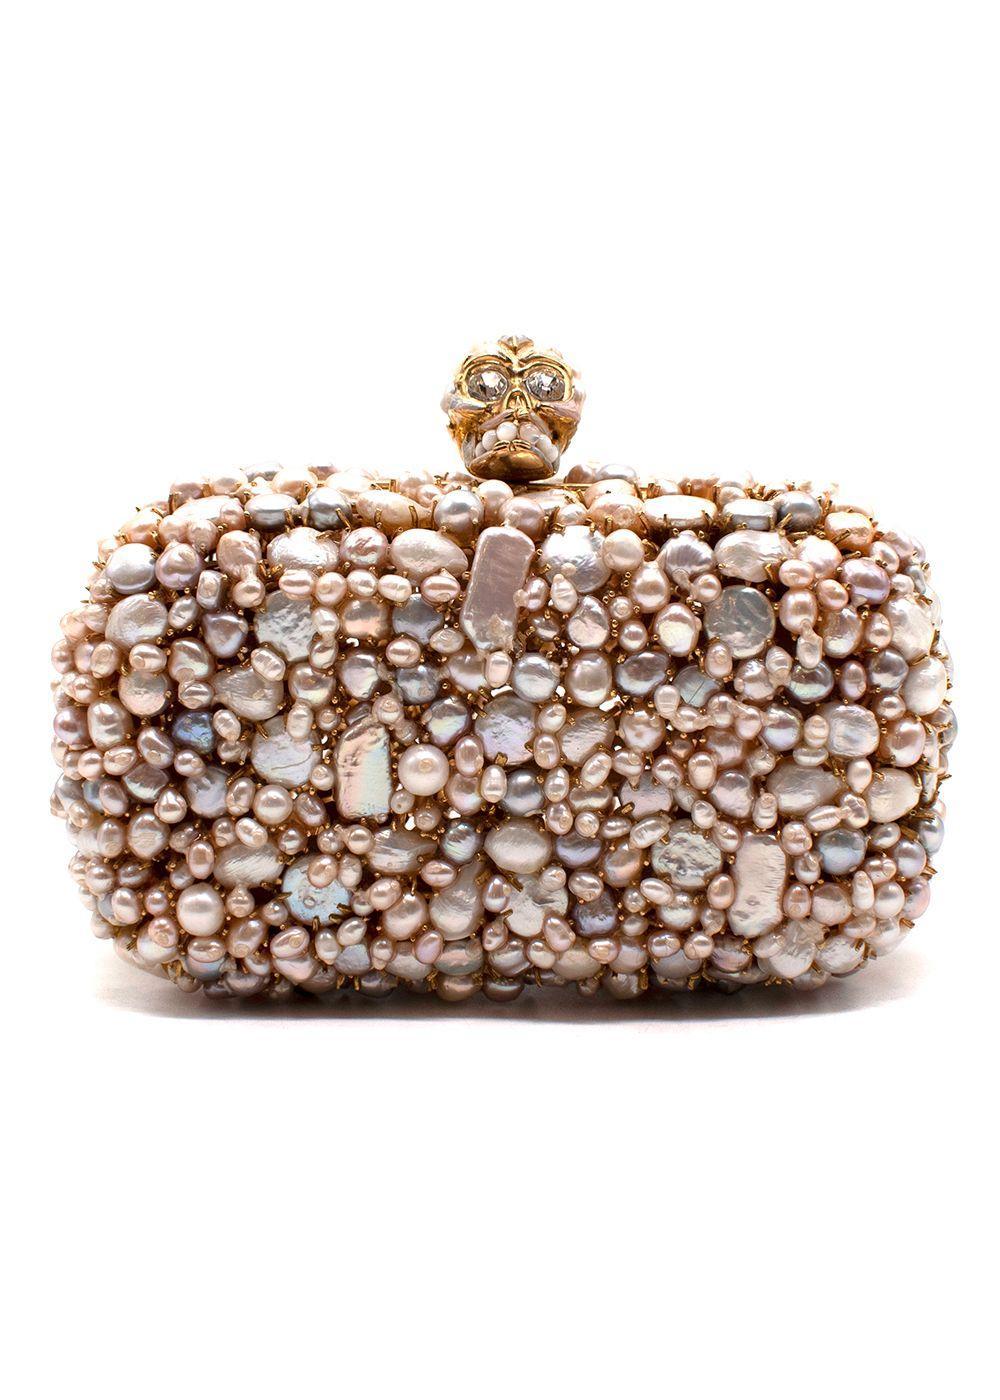 Alexander McQueen Pearl Embellished Clutch Bag
Faux pearl body
Crystal and faux pearl skull fastening
Rectangular body
Nude leather interior
Push clasp fastening
Materials: Faux pearl, metal, leather
Width: 16cm
Height: 11cm
Depth: 5cm
Made in